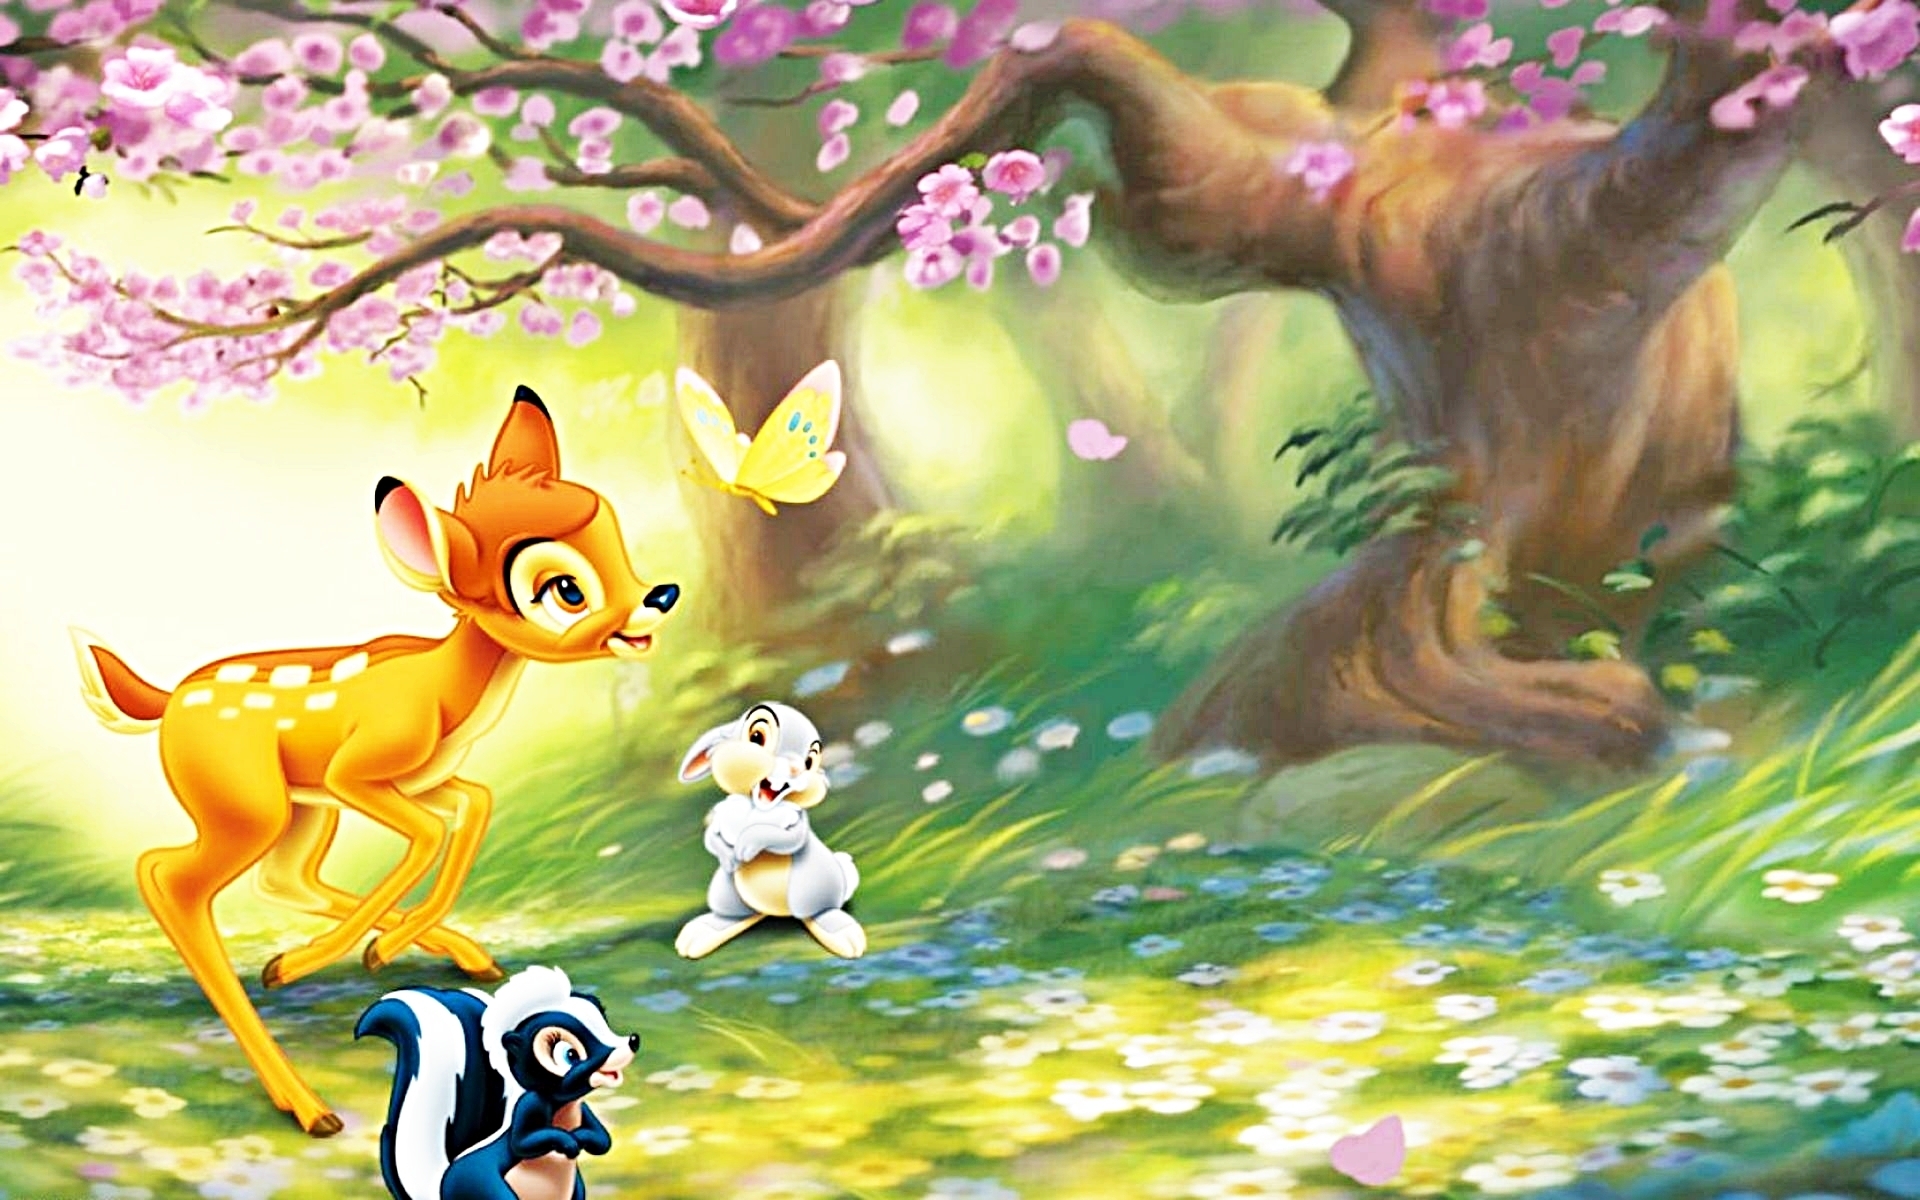 And Disney Character Wallpaper Image For Your